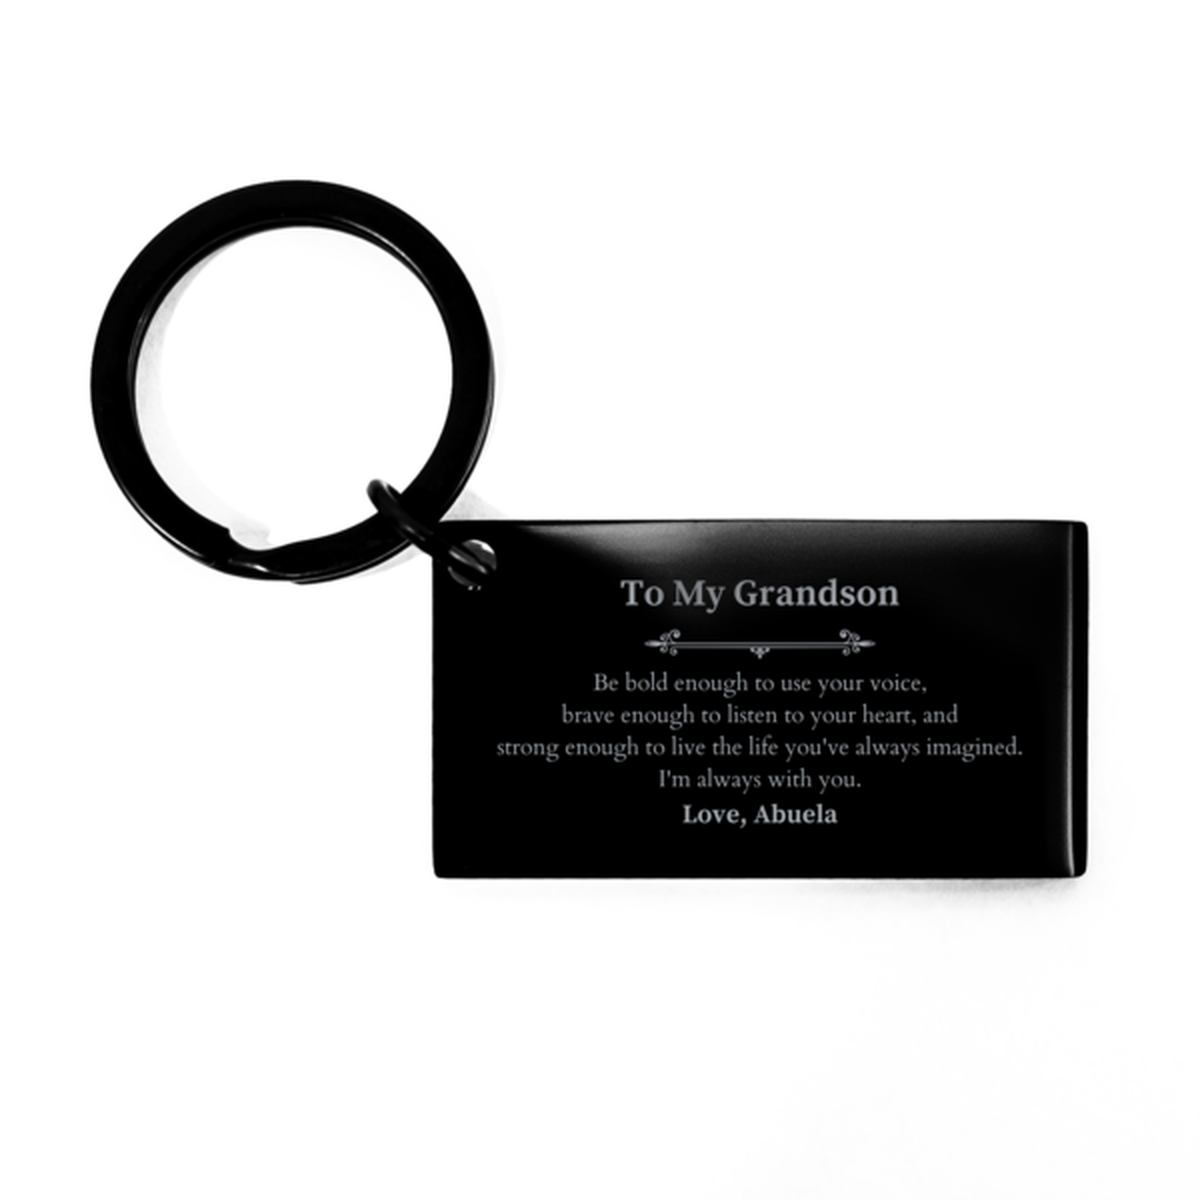 Keepsake Grandson Keychain Gift Idea Graduation Christmas Birthday Grandson from Abuela, Grandson Be bold enough to use your voice, brave enough to listen to your heart. Love, Abuela